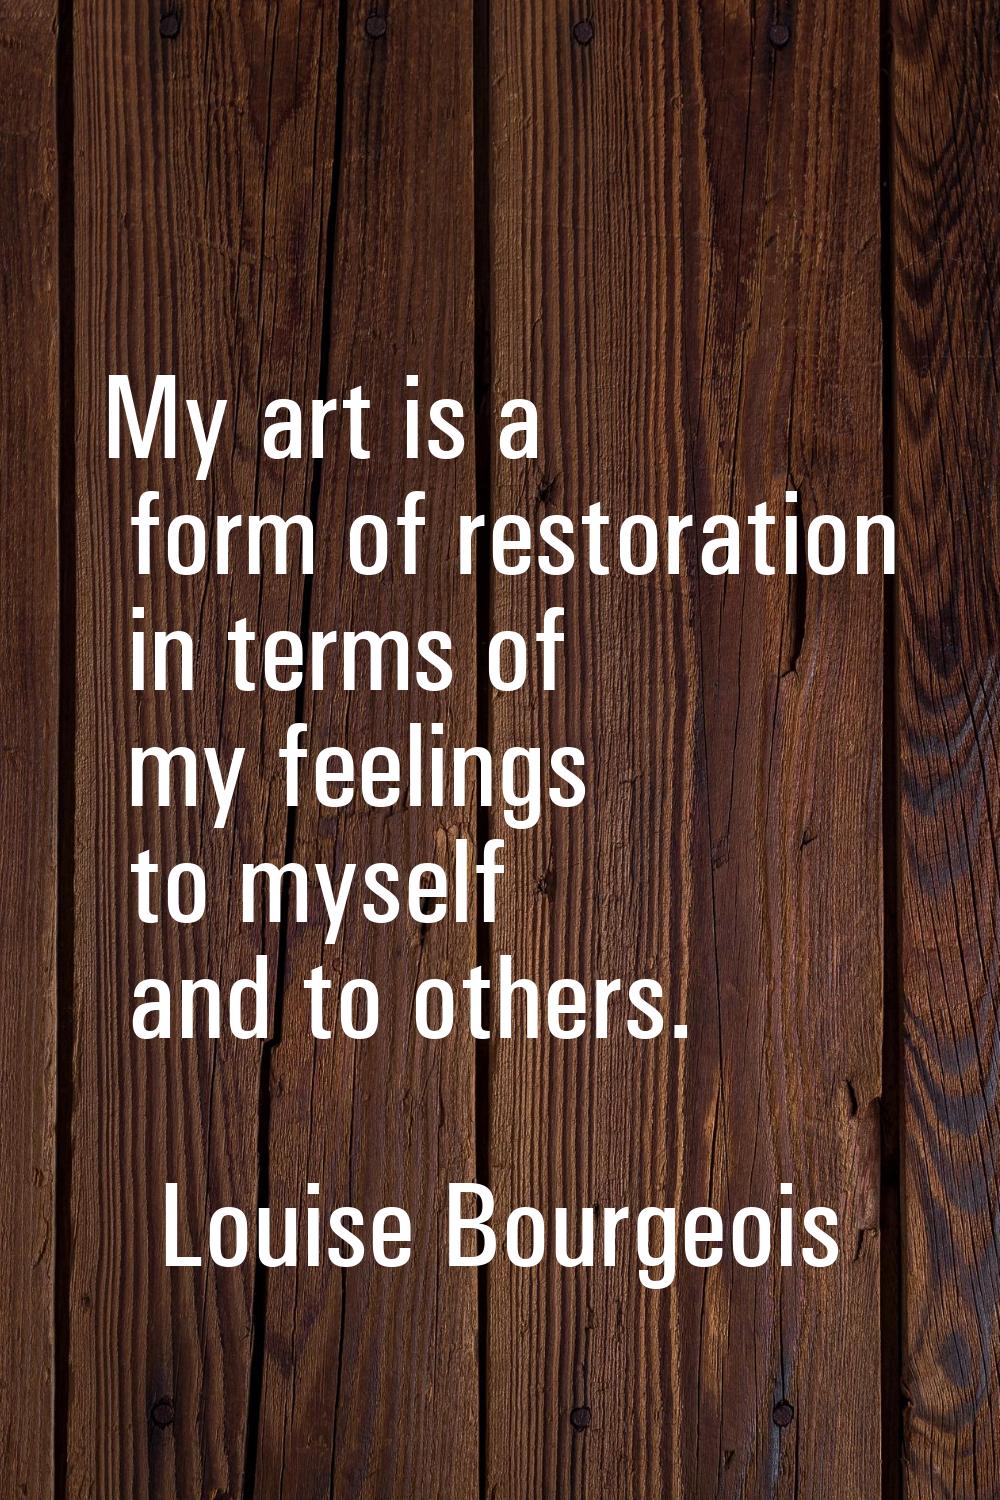 My art is a form of restoration in terms of my feelings to myself and to others.